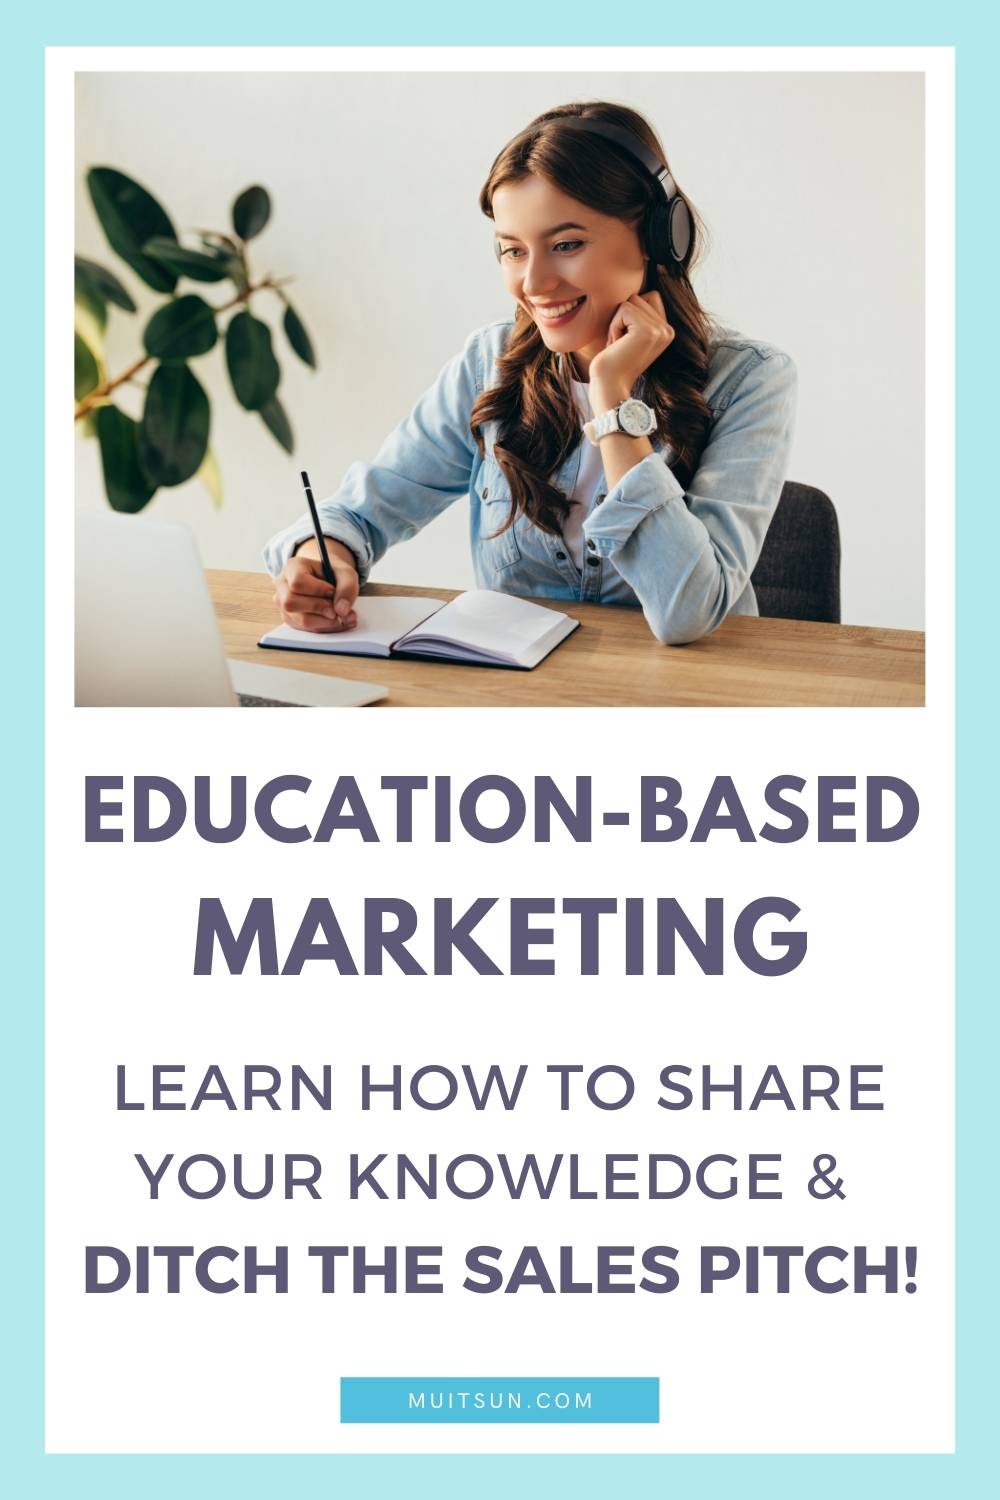 How to Grow Your Business With Education-Based Marketing